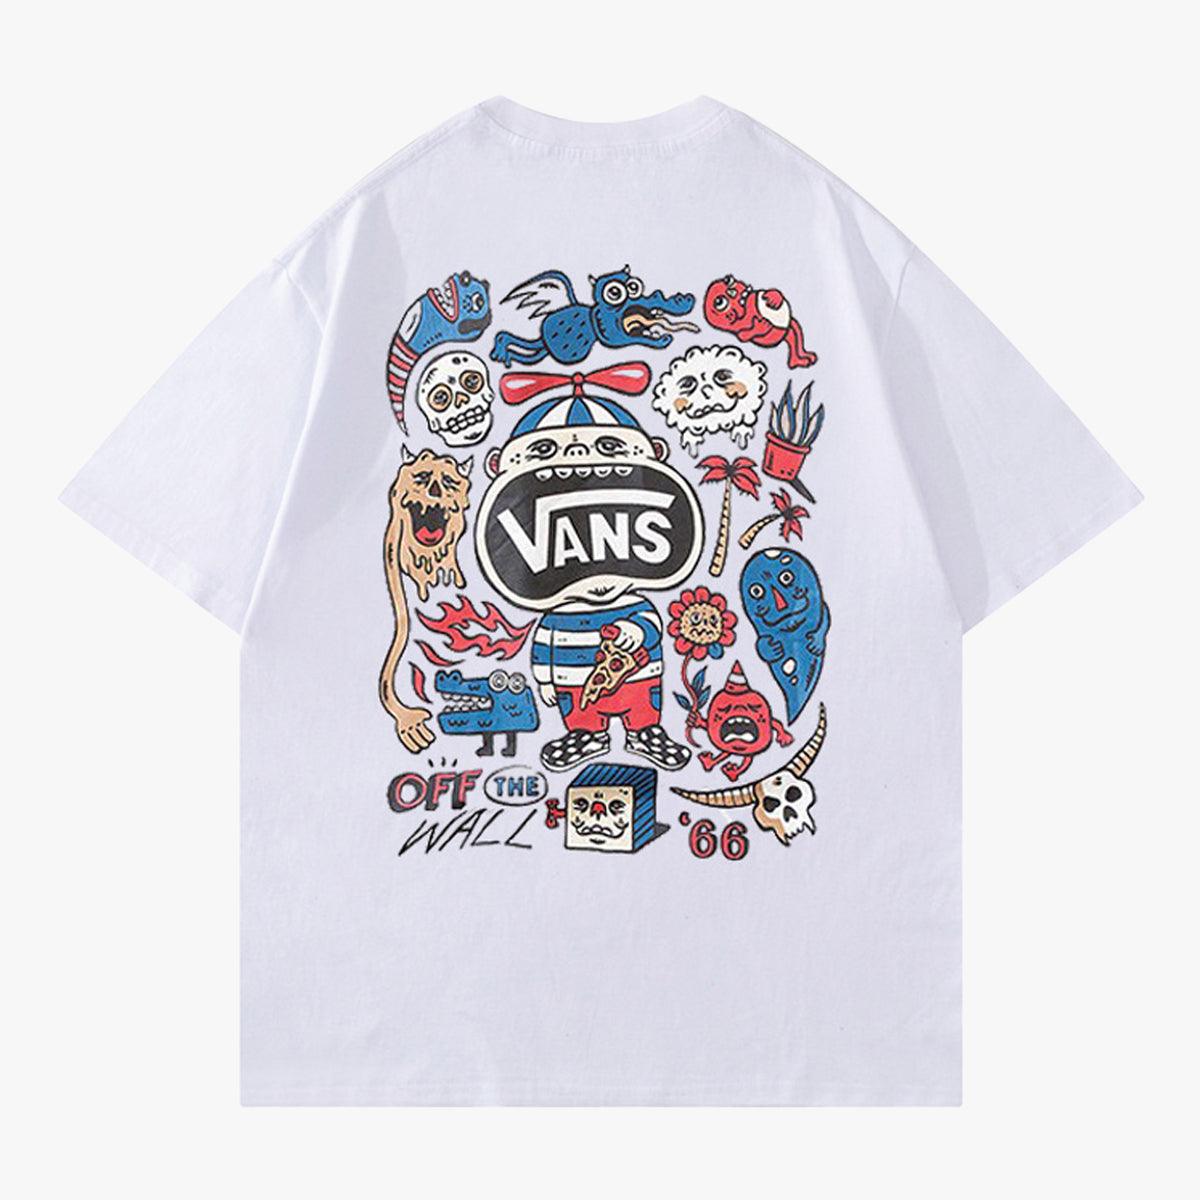 Vans 66 Things • Aesthetic Clothes